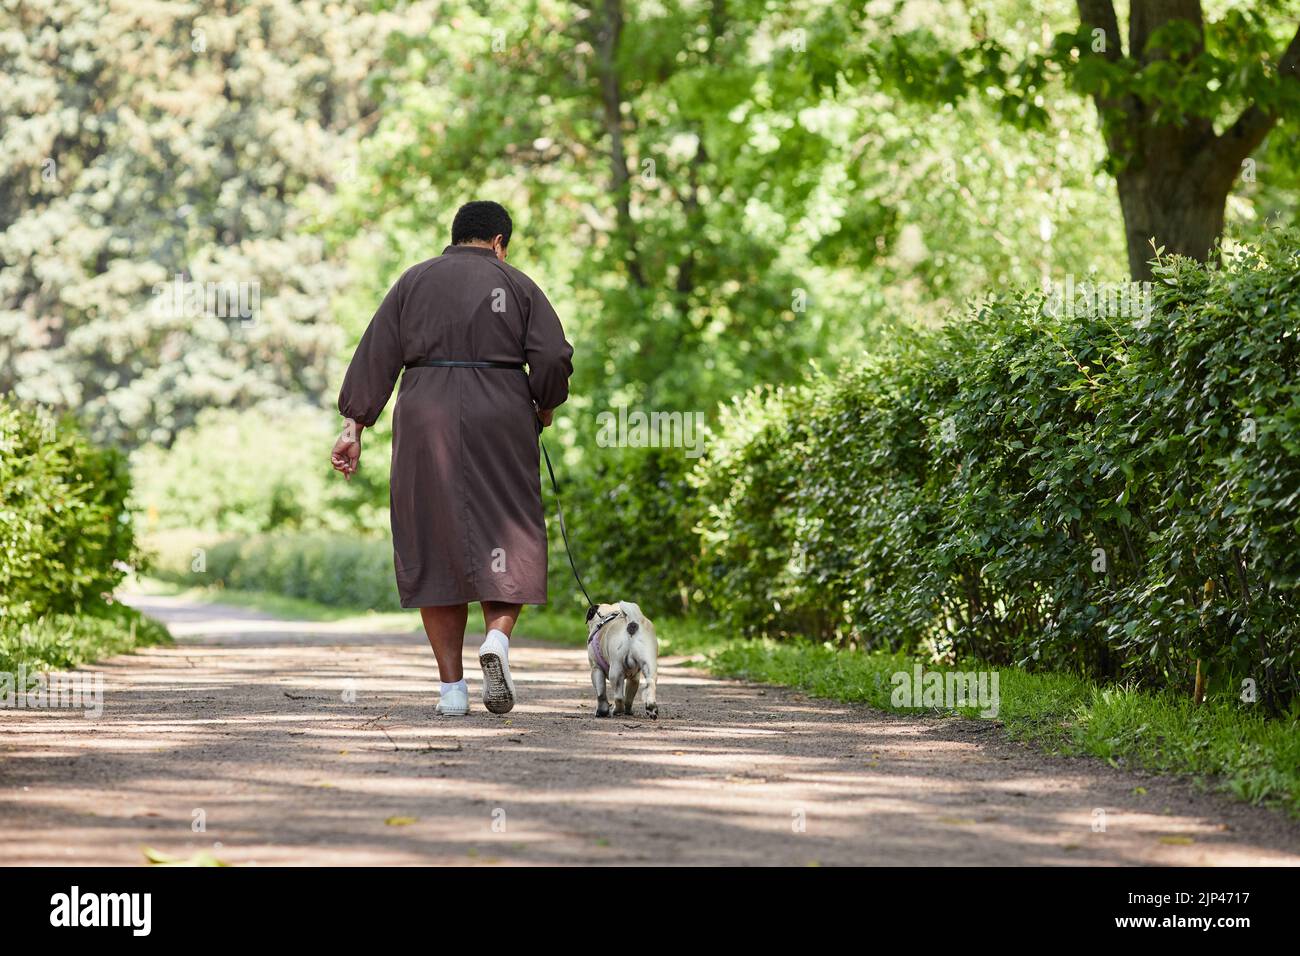 Back view portrait of black mature woman walking dog in park on road path together, copy space Stock Photo